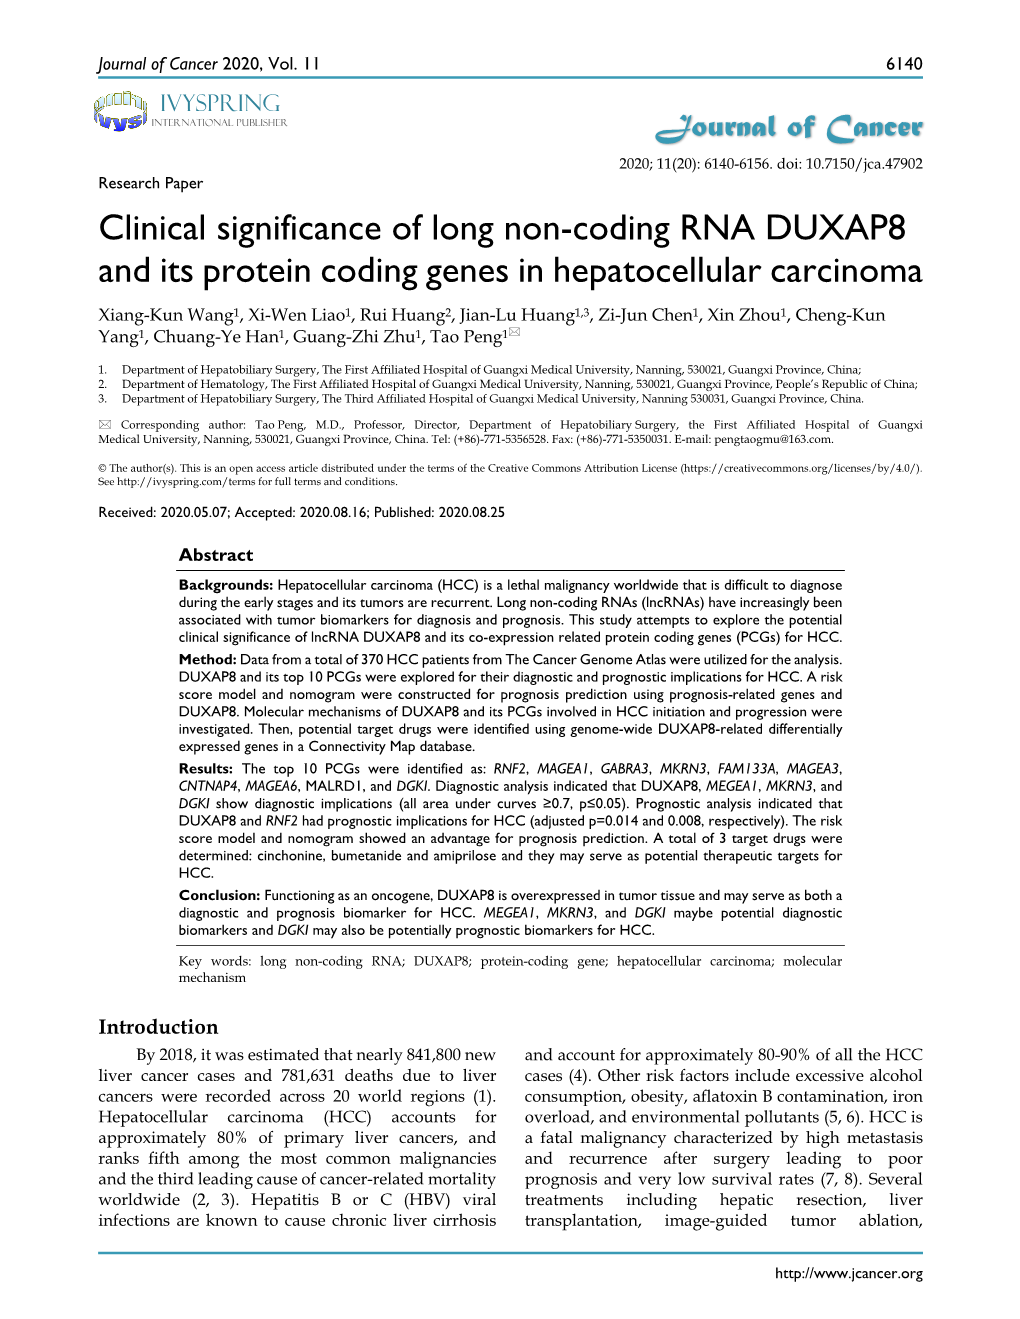 Clinical Significance of Long Non-Coding RNA DUXAP8 and Its Protein Coding Genes in Hepatocellular Carcinoma